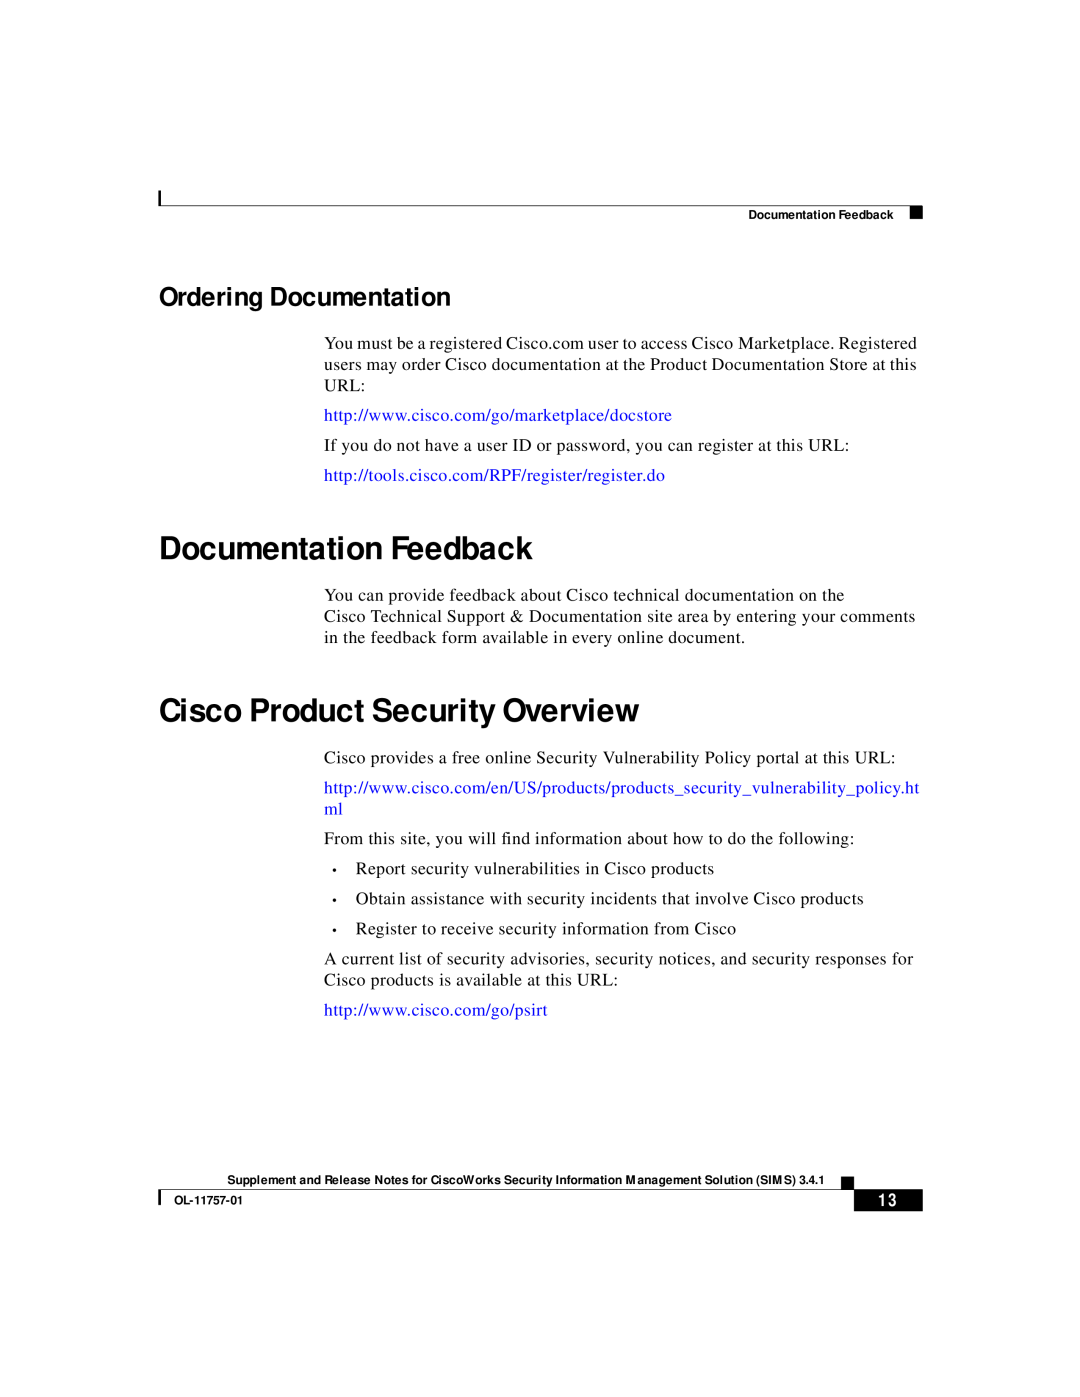 Cisco Systems OL-11757-01 manual Documentation Feedback, Cisco Product Security Overview, Ordering Documentation 